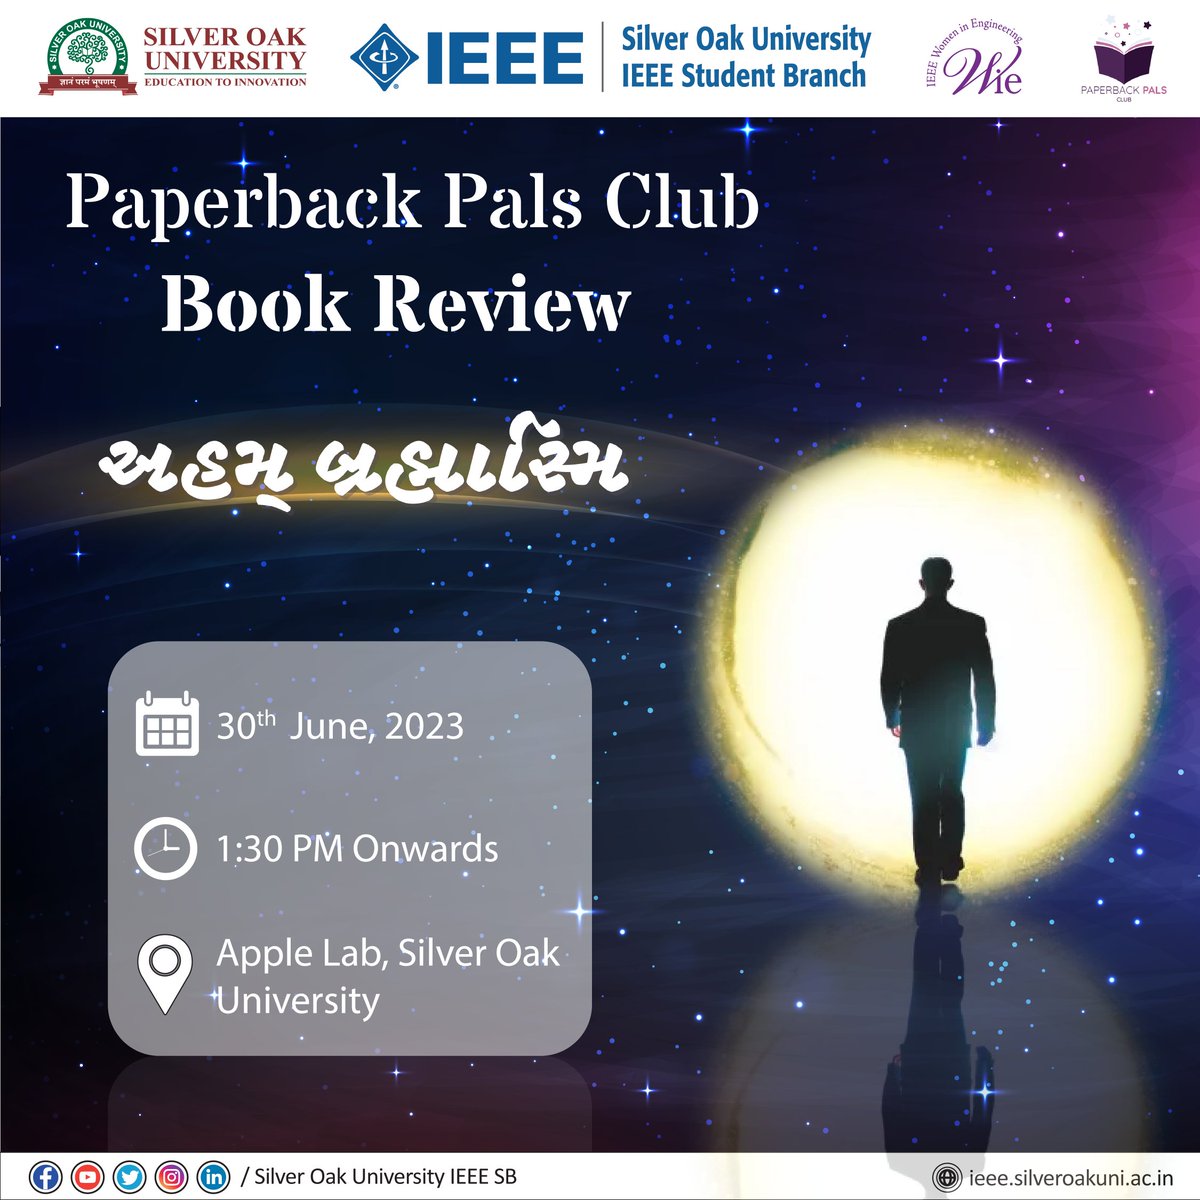 Get prepared for the literary critique session on “Aham Brahmasmi” by Dr. Nimit Oza, hosted by #PaperbackPals under #IEEESOUWIEAG. #BookReview #ieee #ieeesousb #SoU #SilverOakUniversity